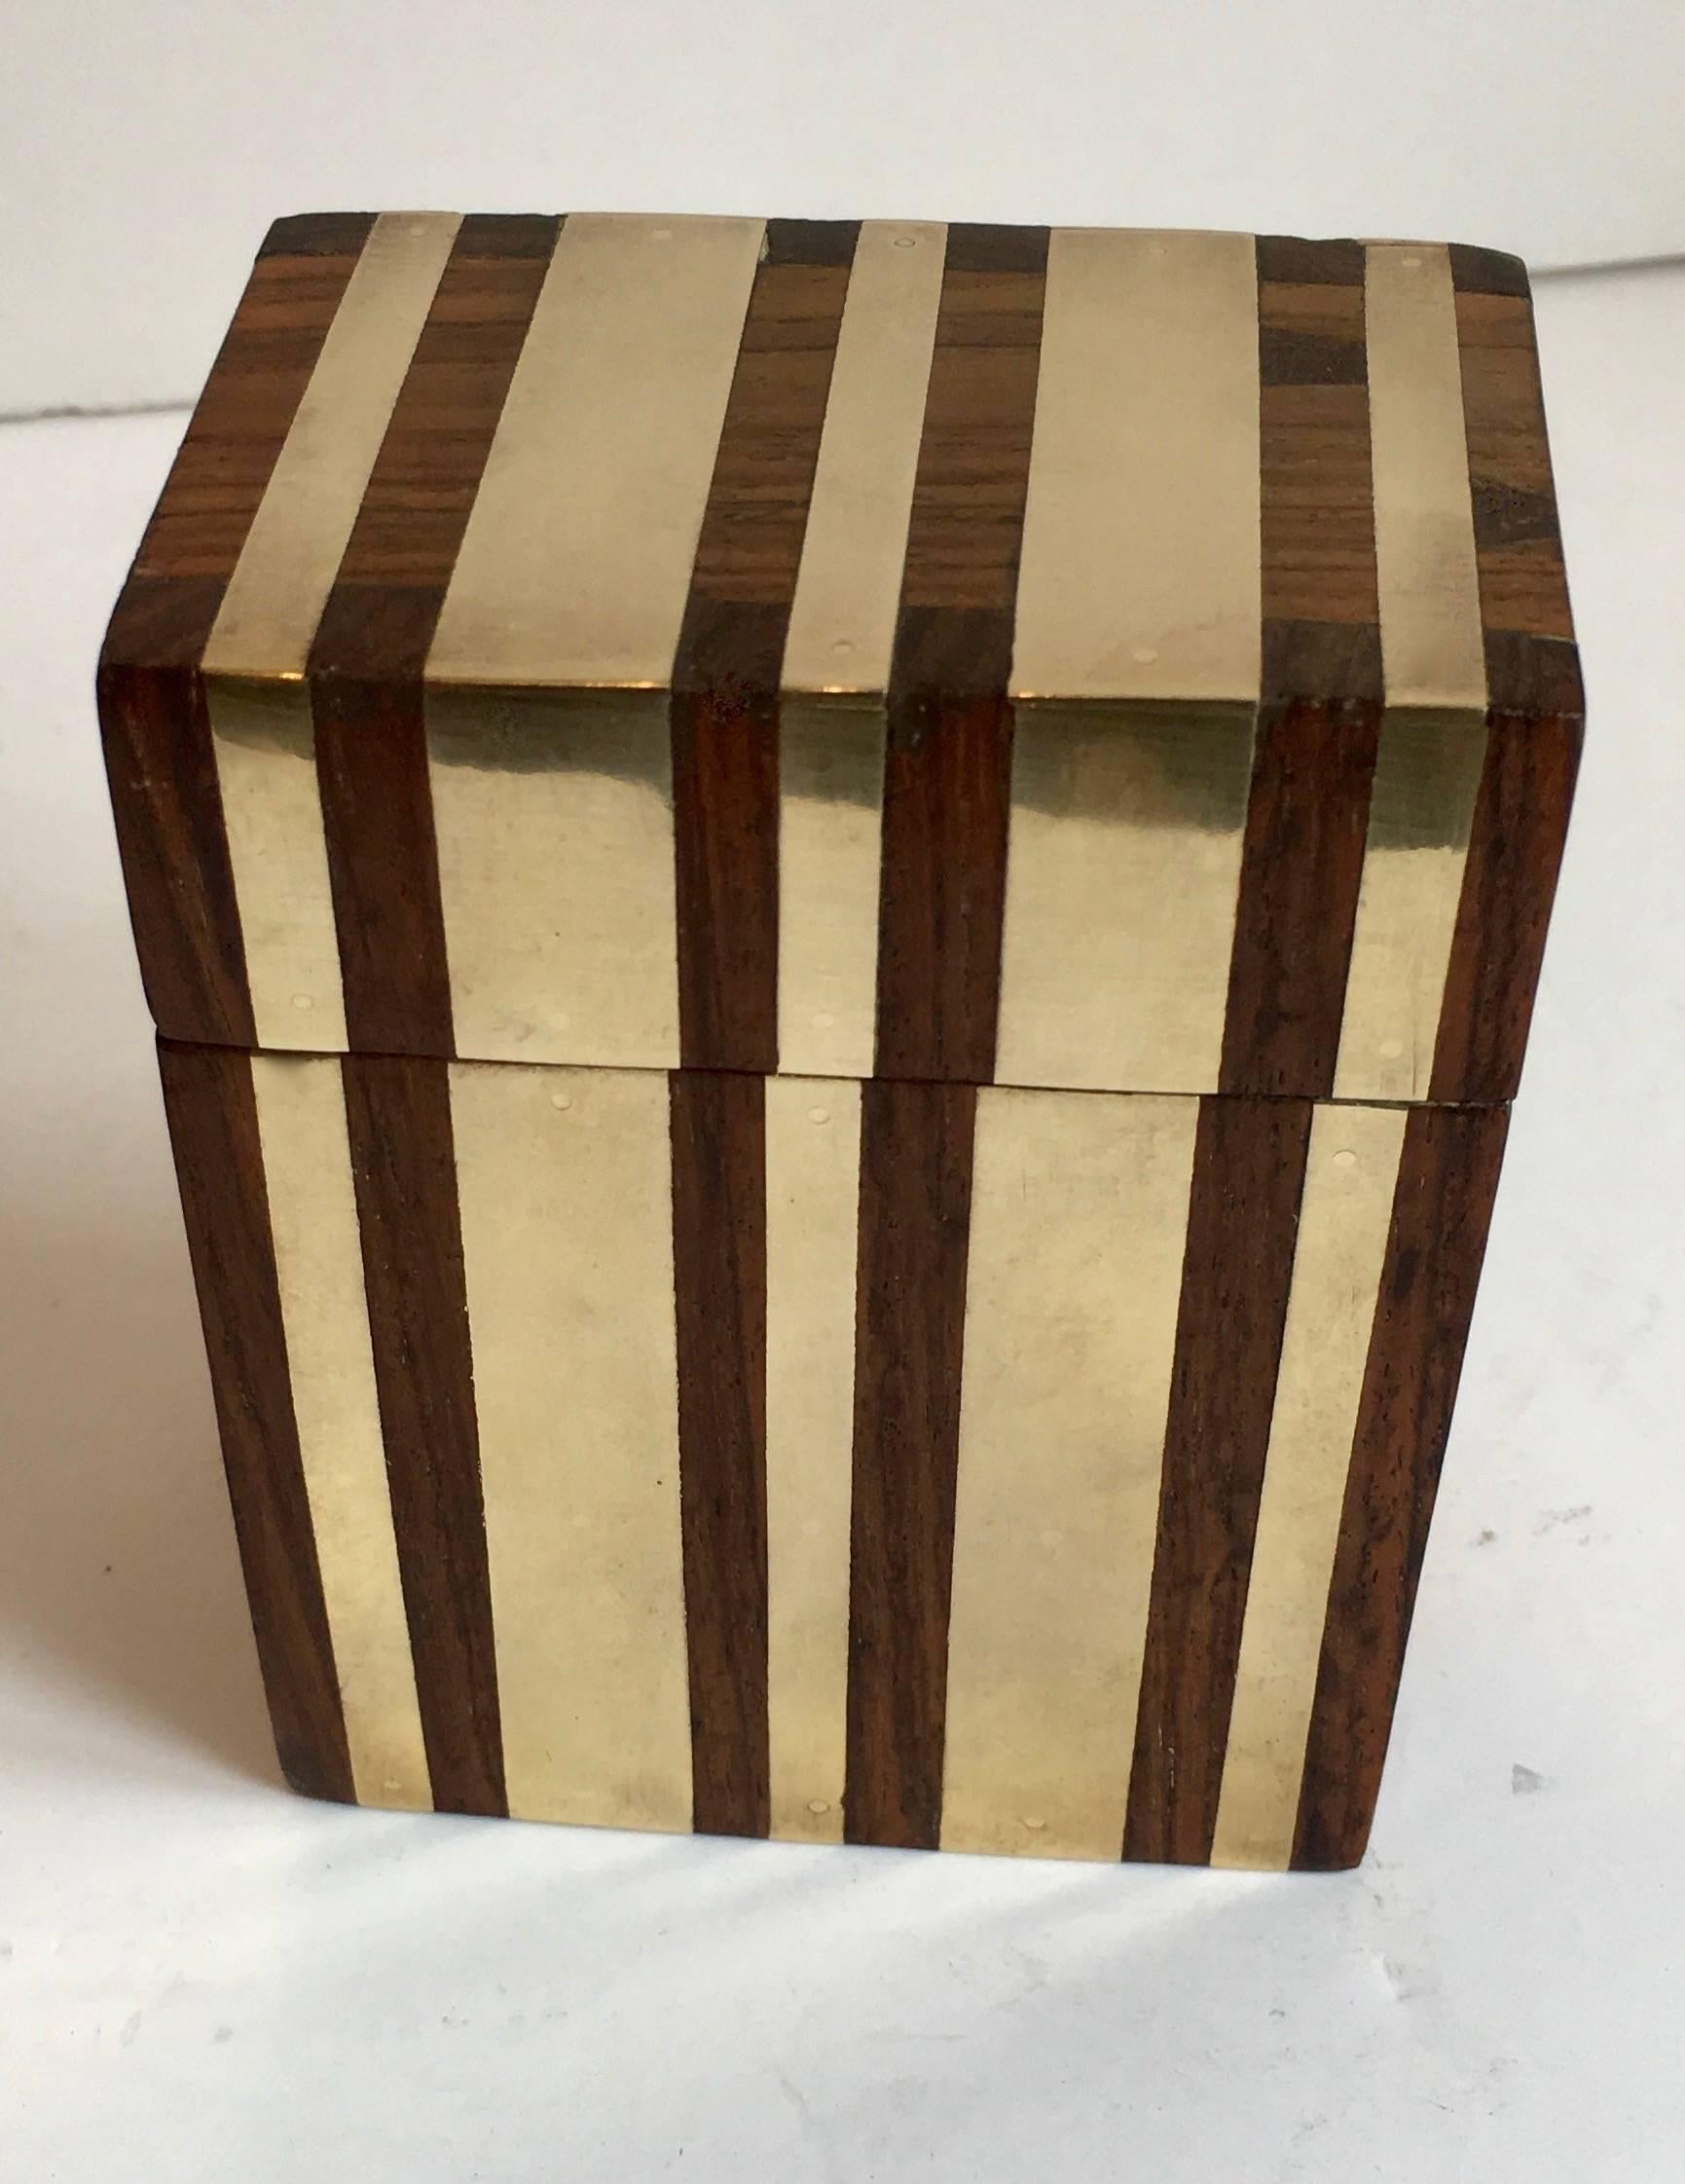 Hinged wooden box with inlaid brass strips - a unique storage piece, handsome in any setting.